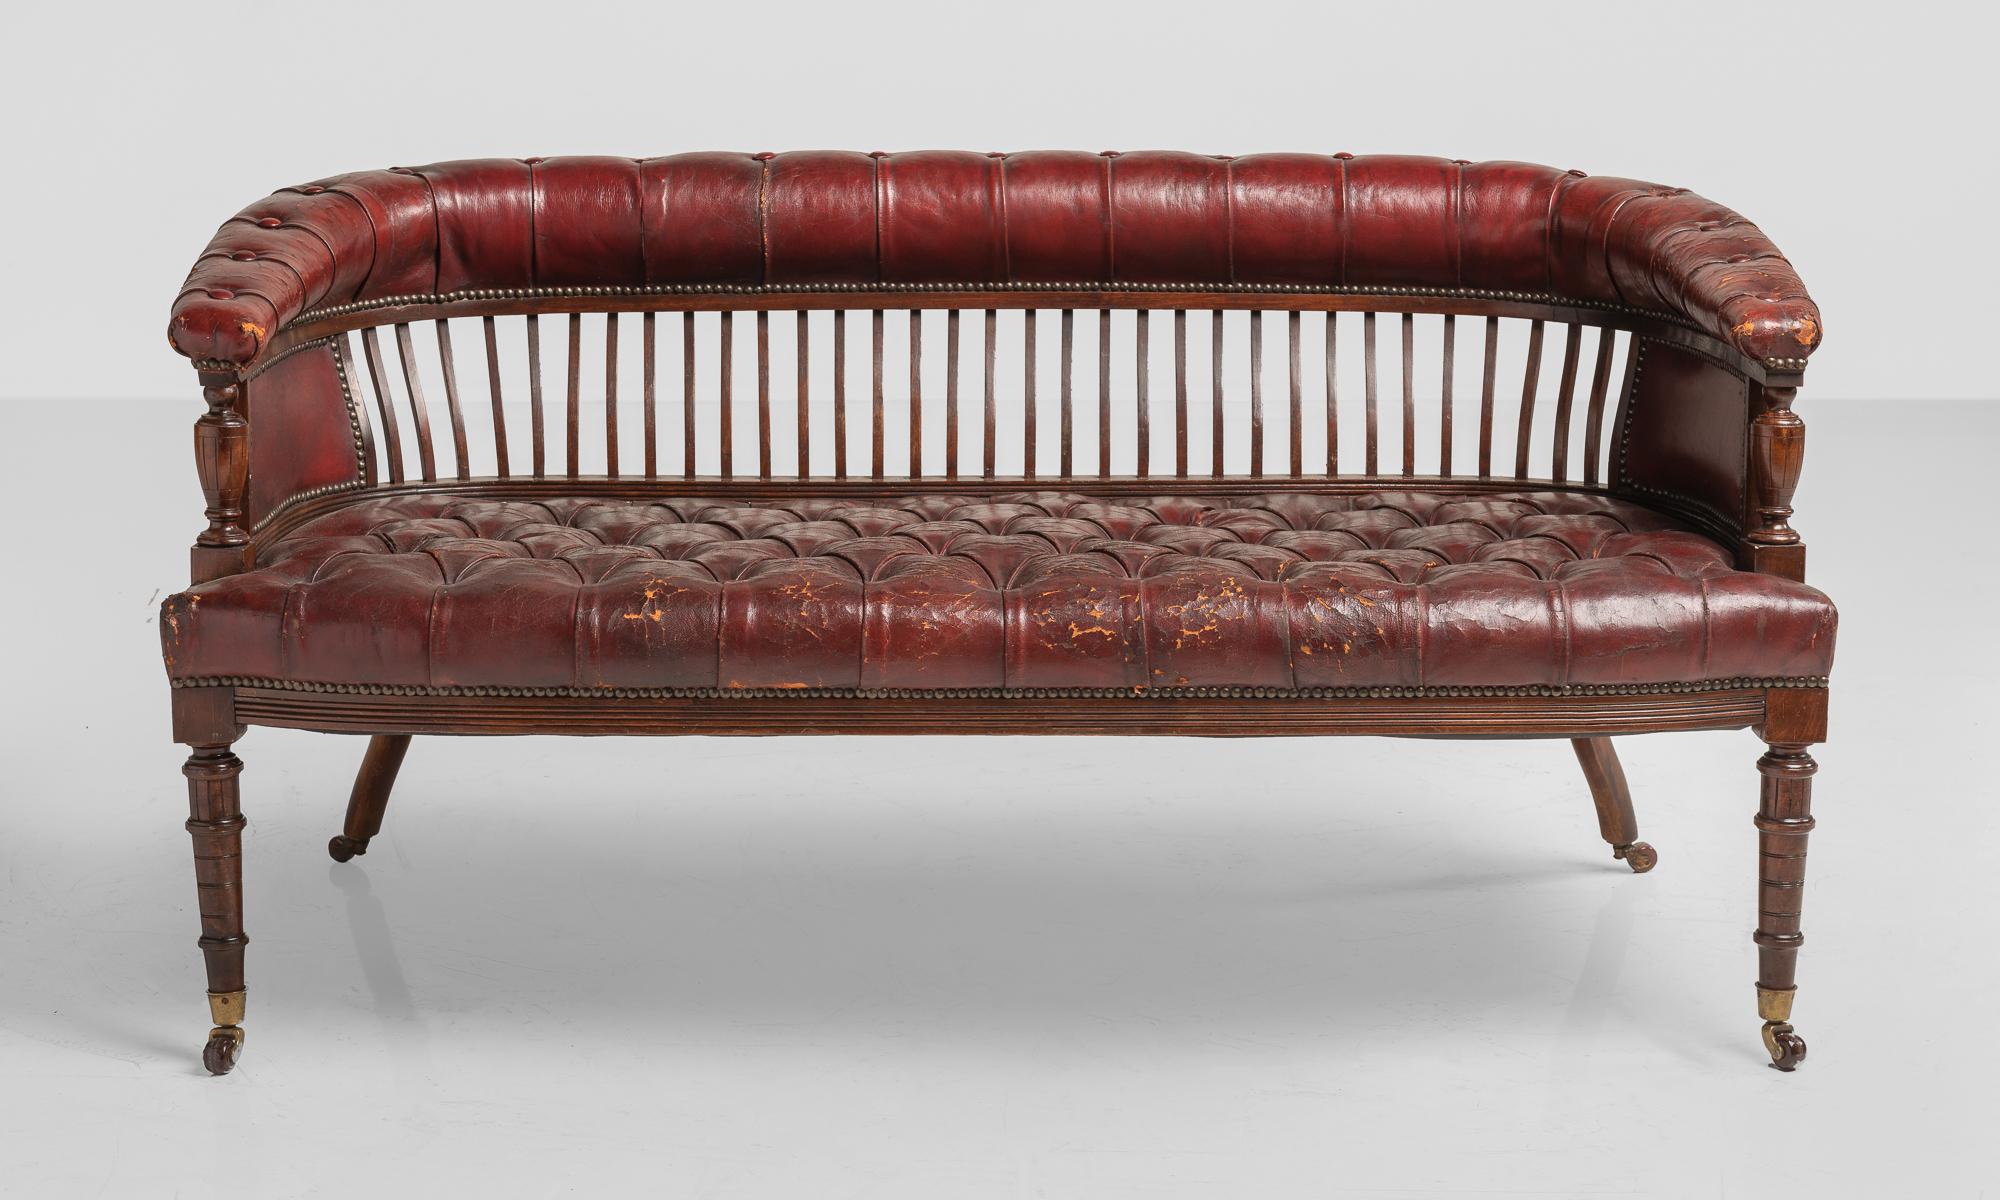 Victorian Leather & Walnut Sofa, England, circa 1900

Buttoned leather seat and backrest with slatted walnut back. On handsome turned legs with original brass castors.

Measures: 54